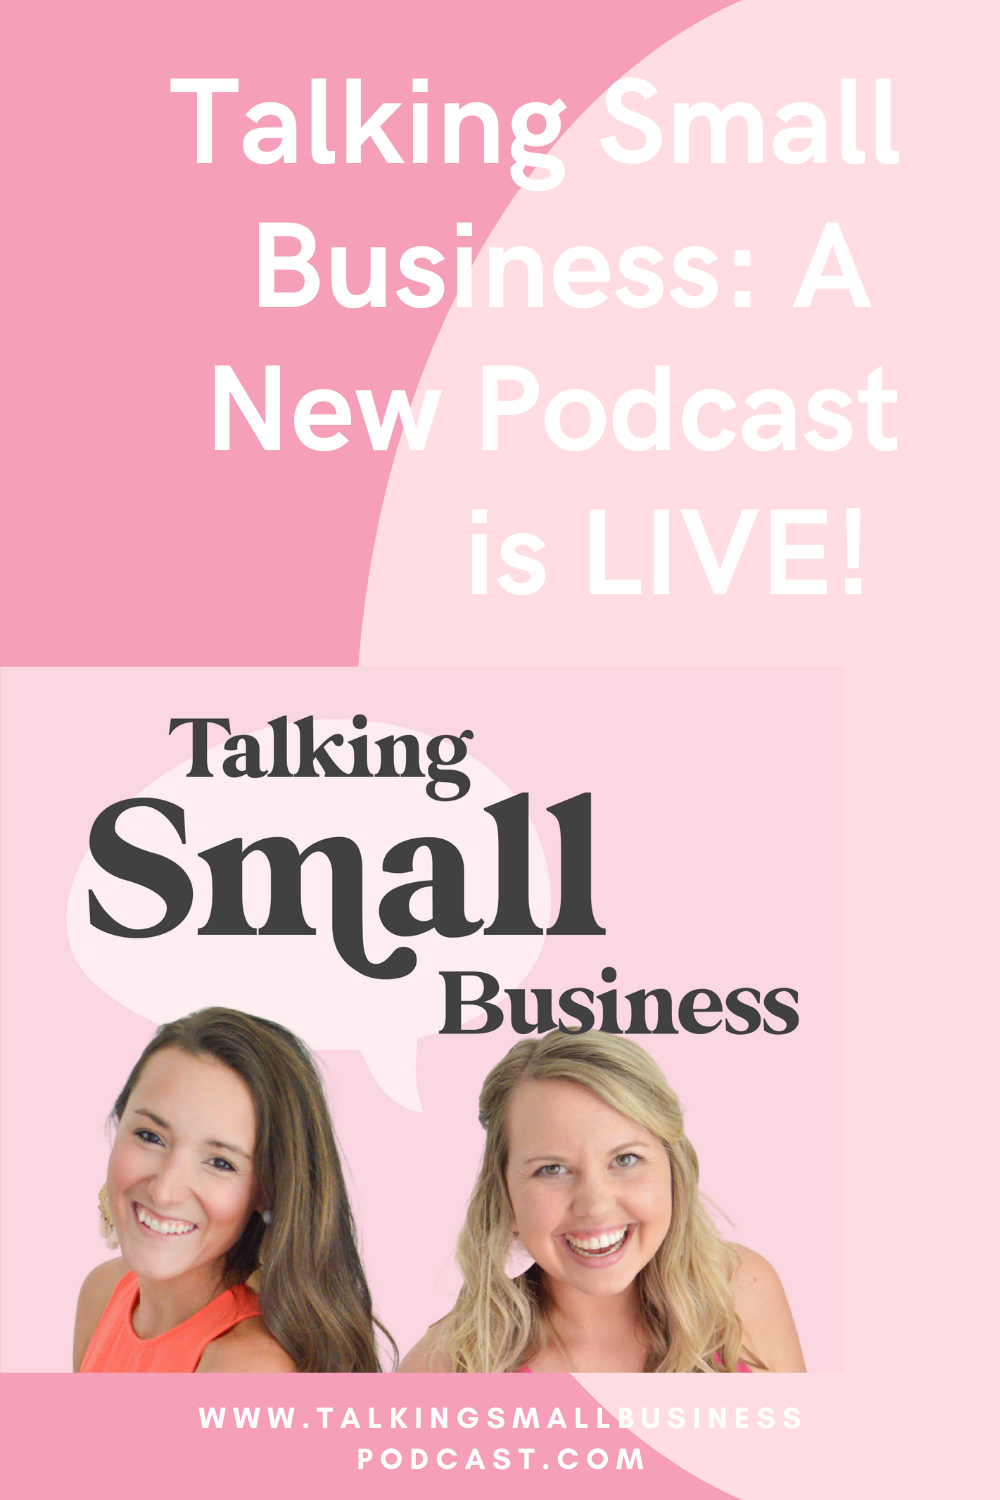 the talking small business podcast is live